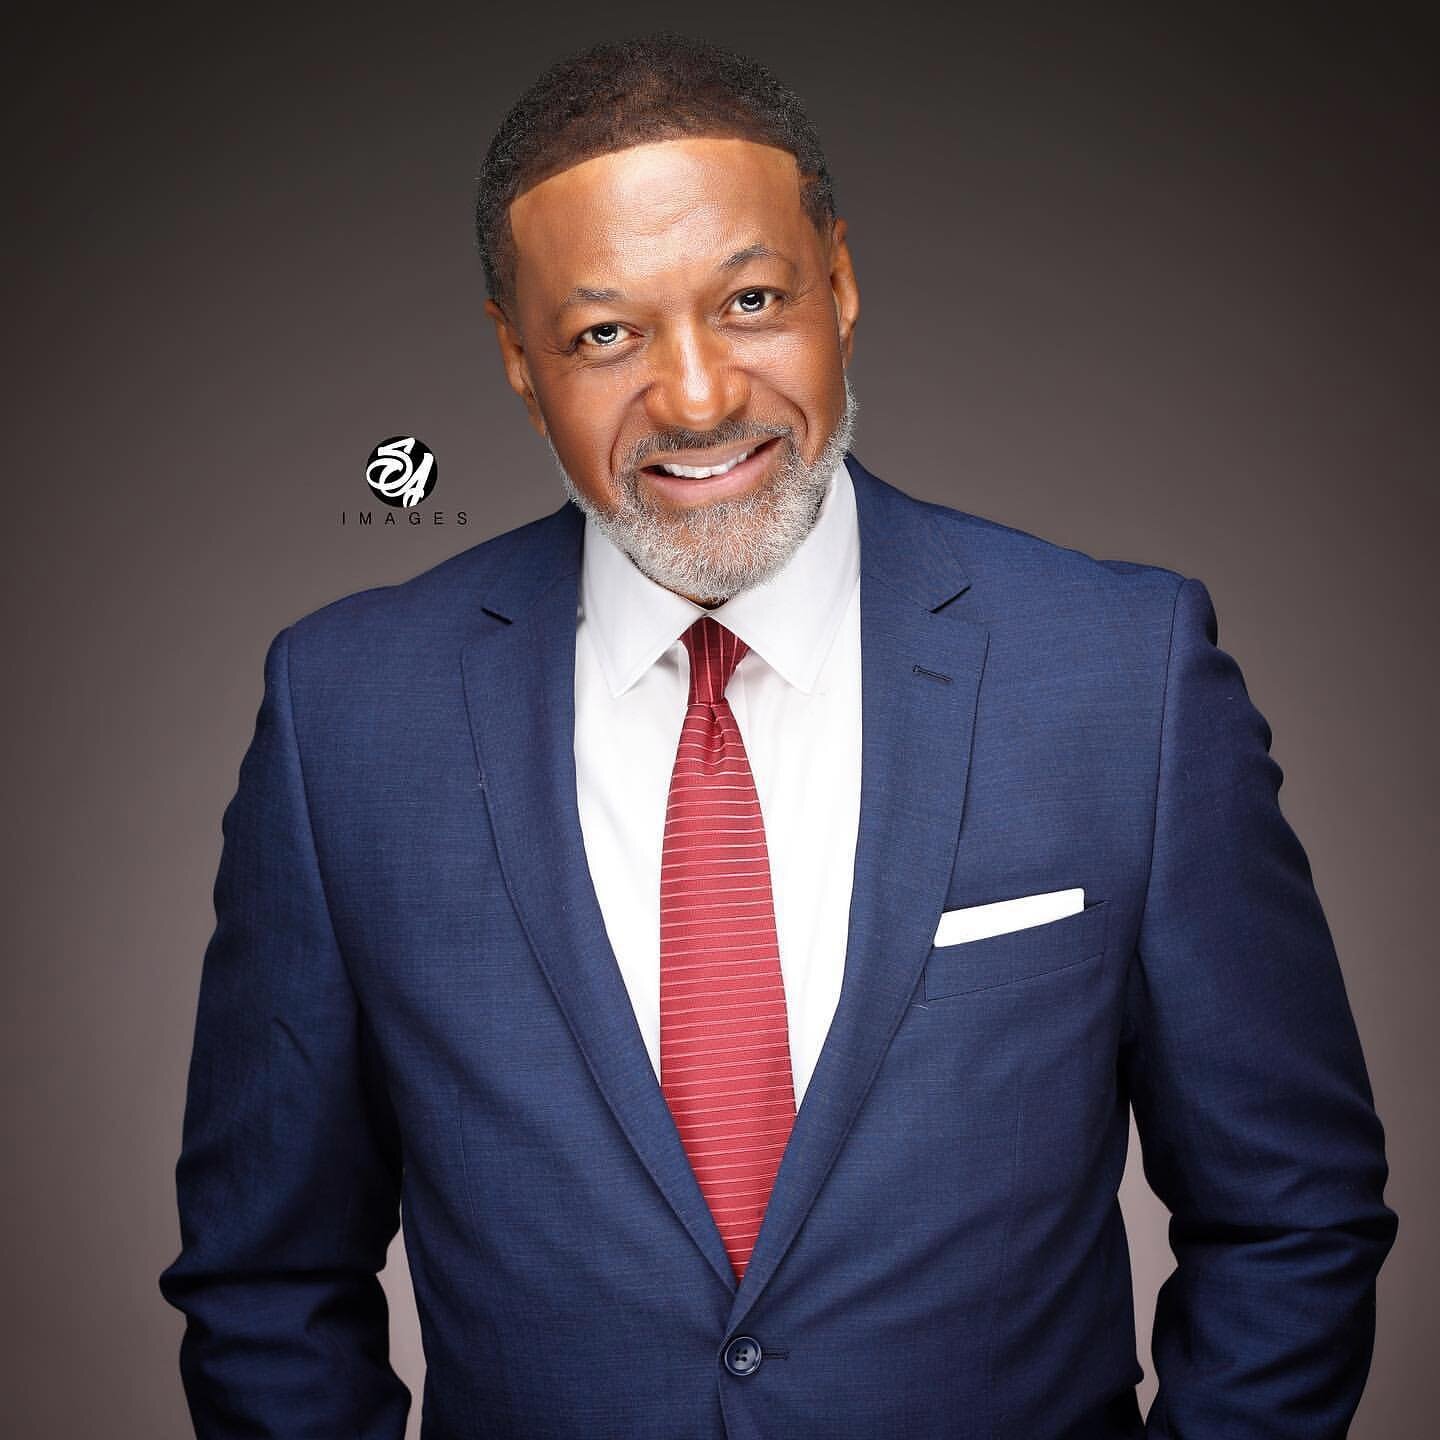 Sharp dressed and tack sharp by KC Photographer  @sjordonimages Distinguished, gifted and black captured in the studio with our new eye lighter reflector ask about it when booking the studio for your portrait shoot!
Client: Bishop Jack Vaughn. 
@evan